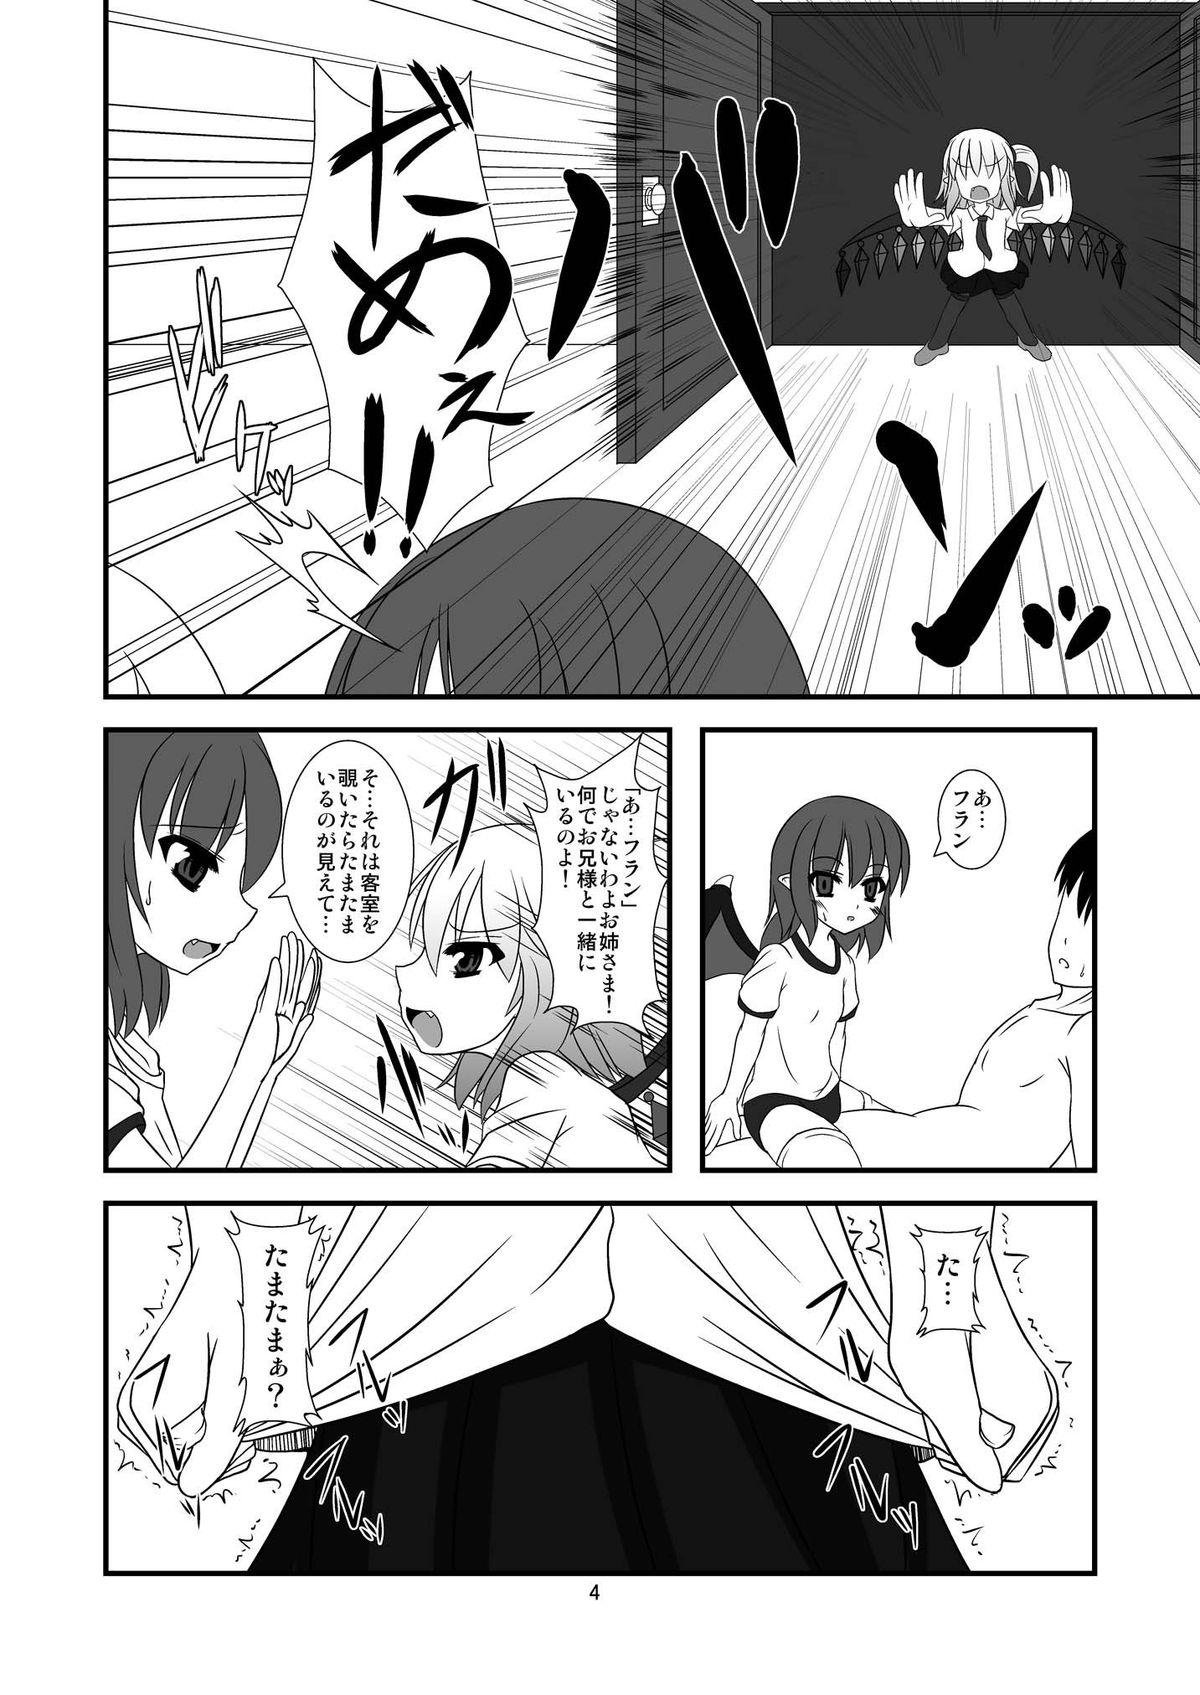 Teasing Touhou Do M Hoihoi - Touhou project Playing - Page 4